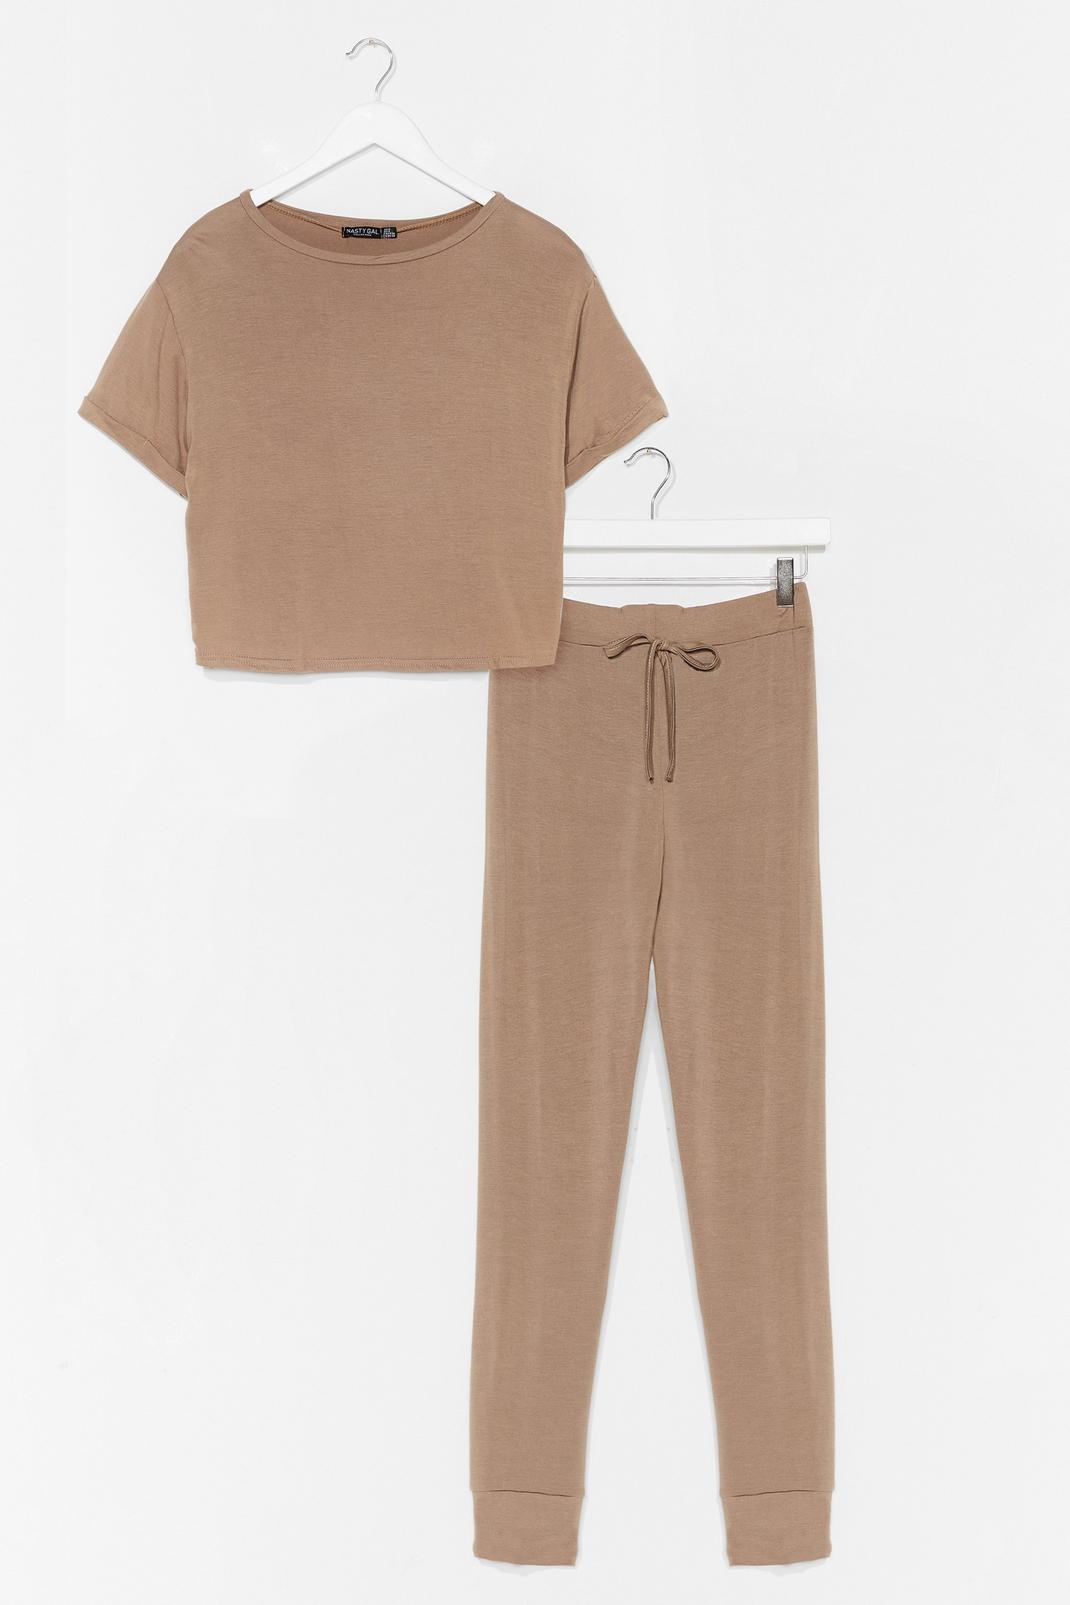 Sand T-Shirt and Fitted Sweatpants Pajama Set image number 1